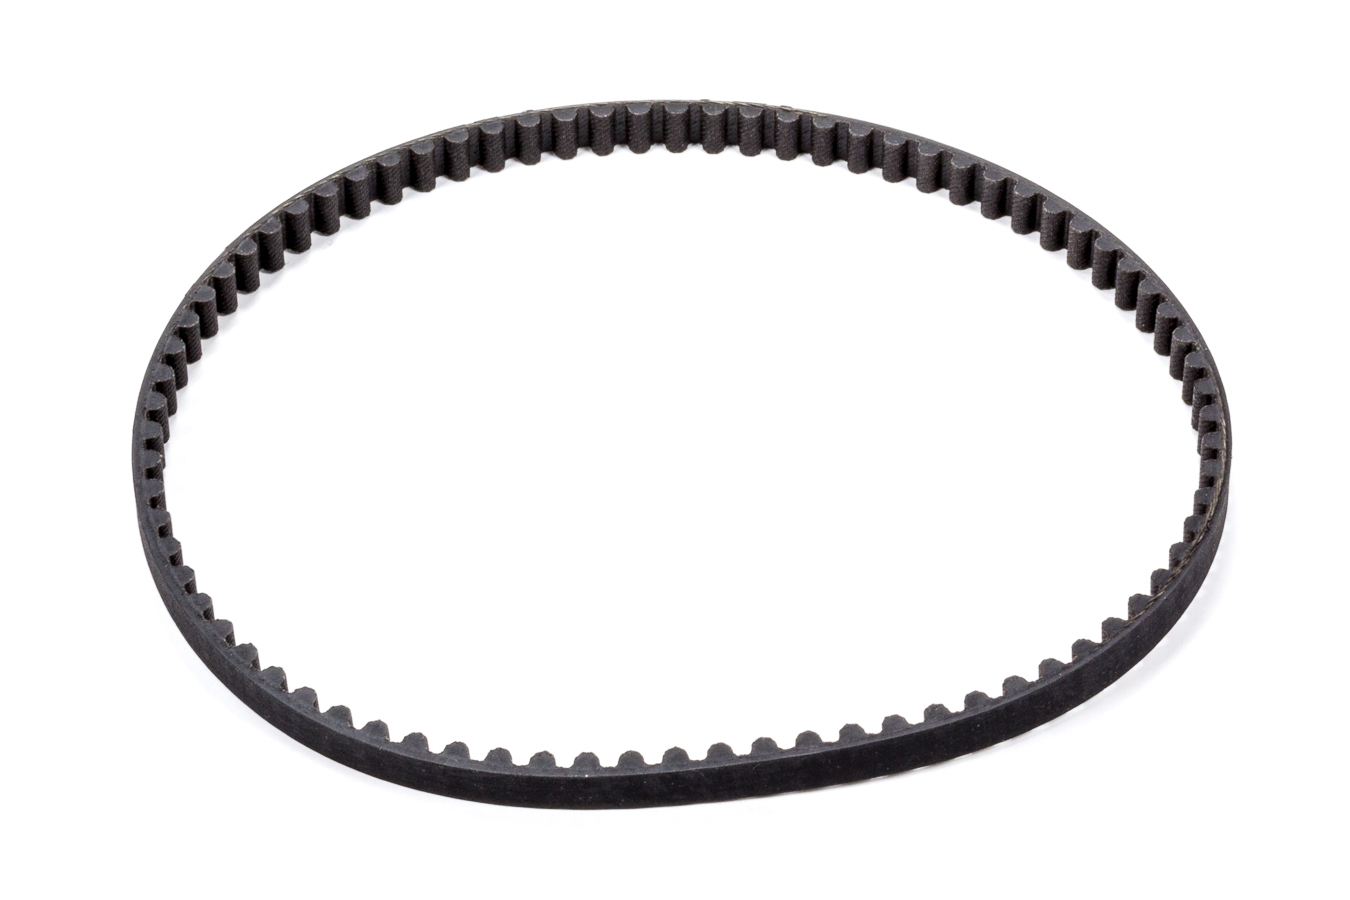 Jones Racing Products 624-10HD HTD Drive Belt, 24.570 in Long, 10 mm Wide, 8 mm Pitch, Each